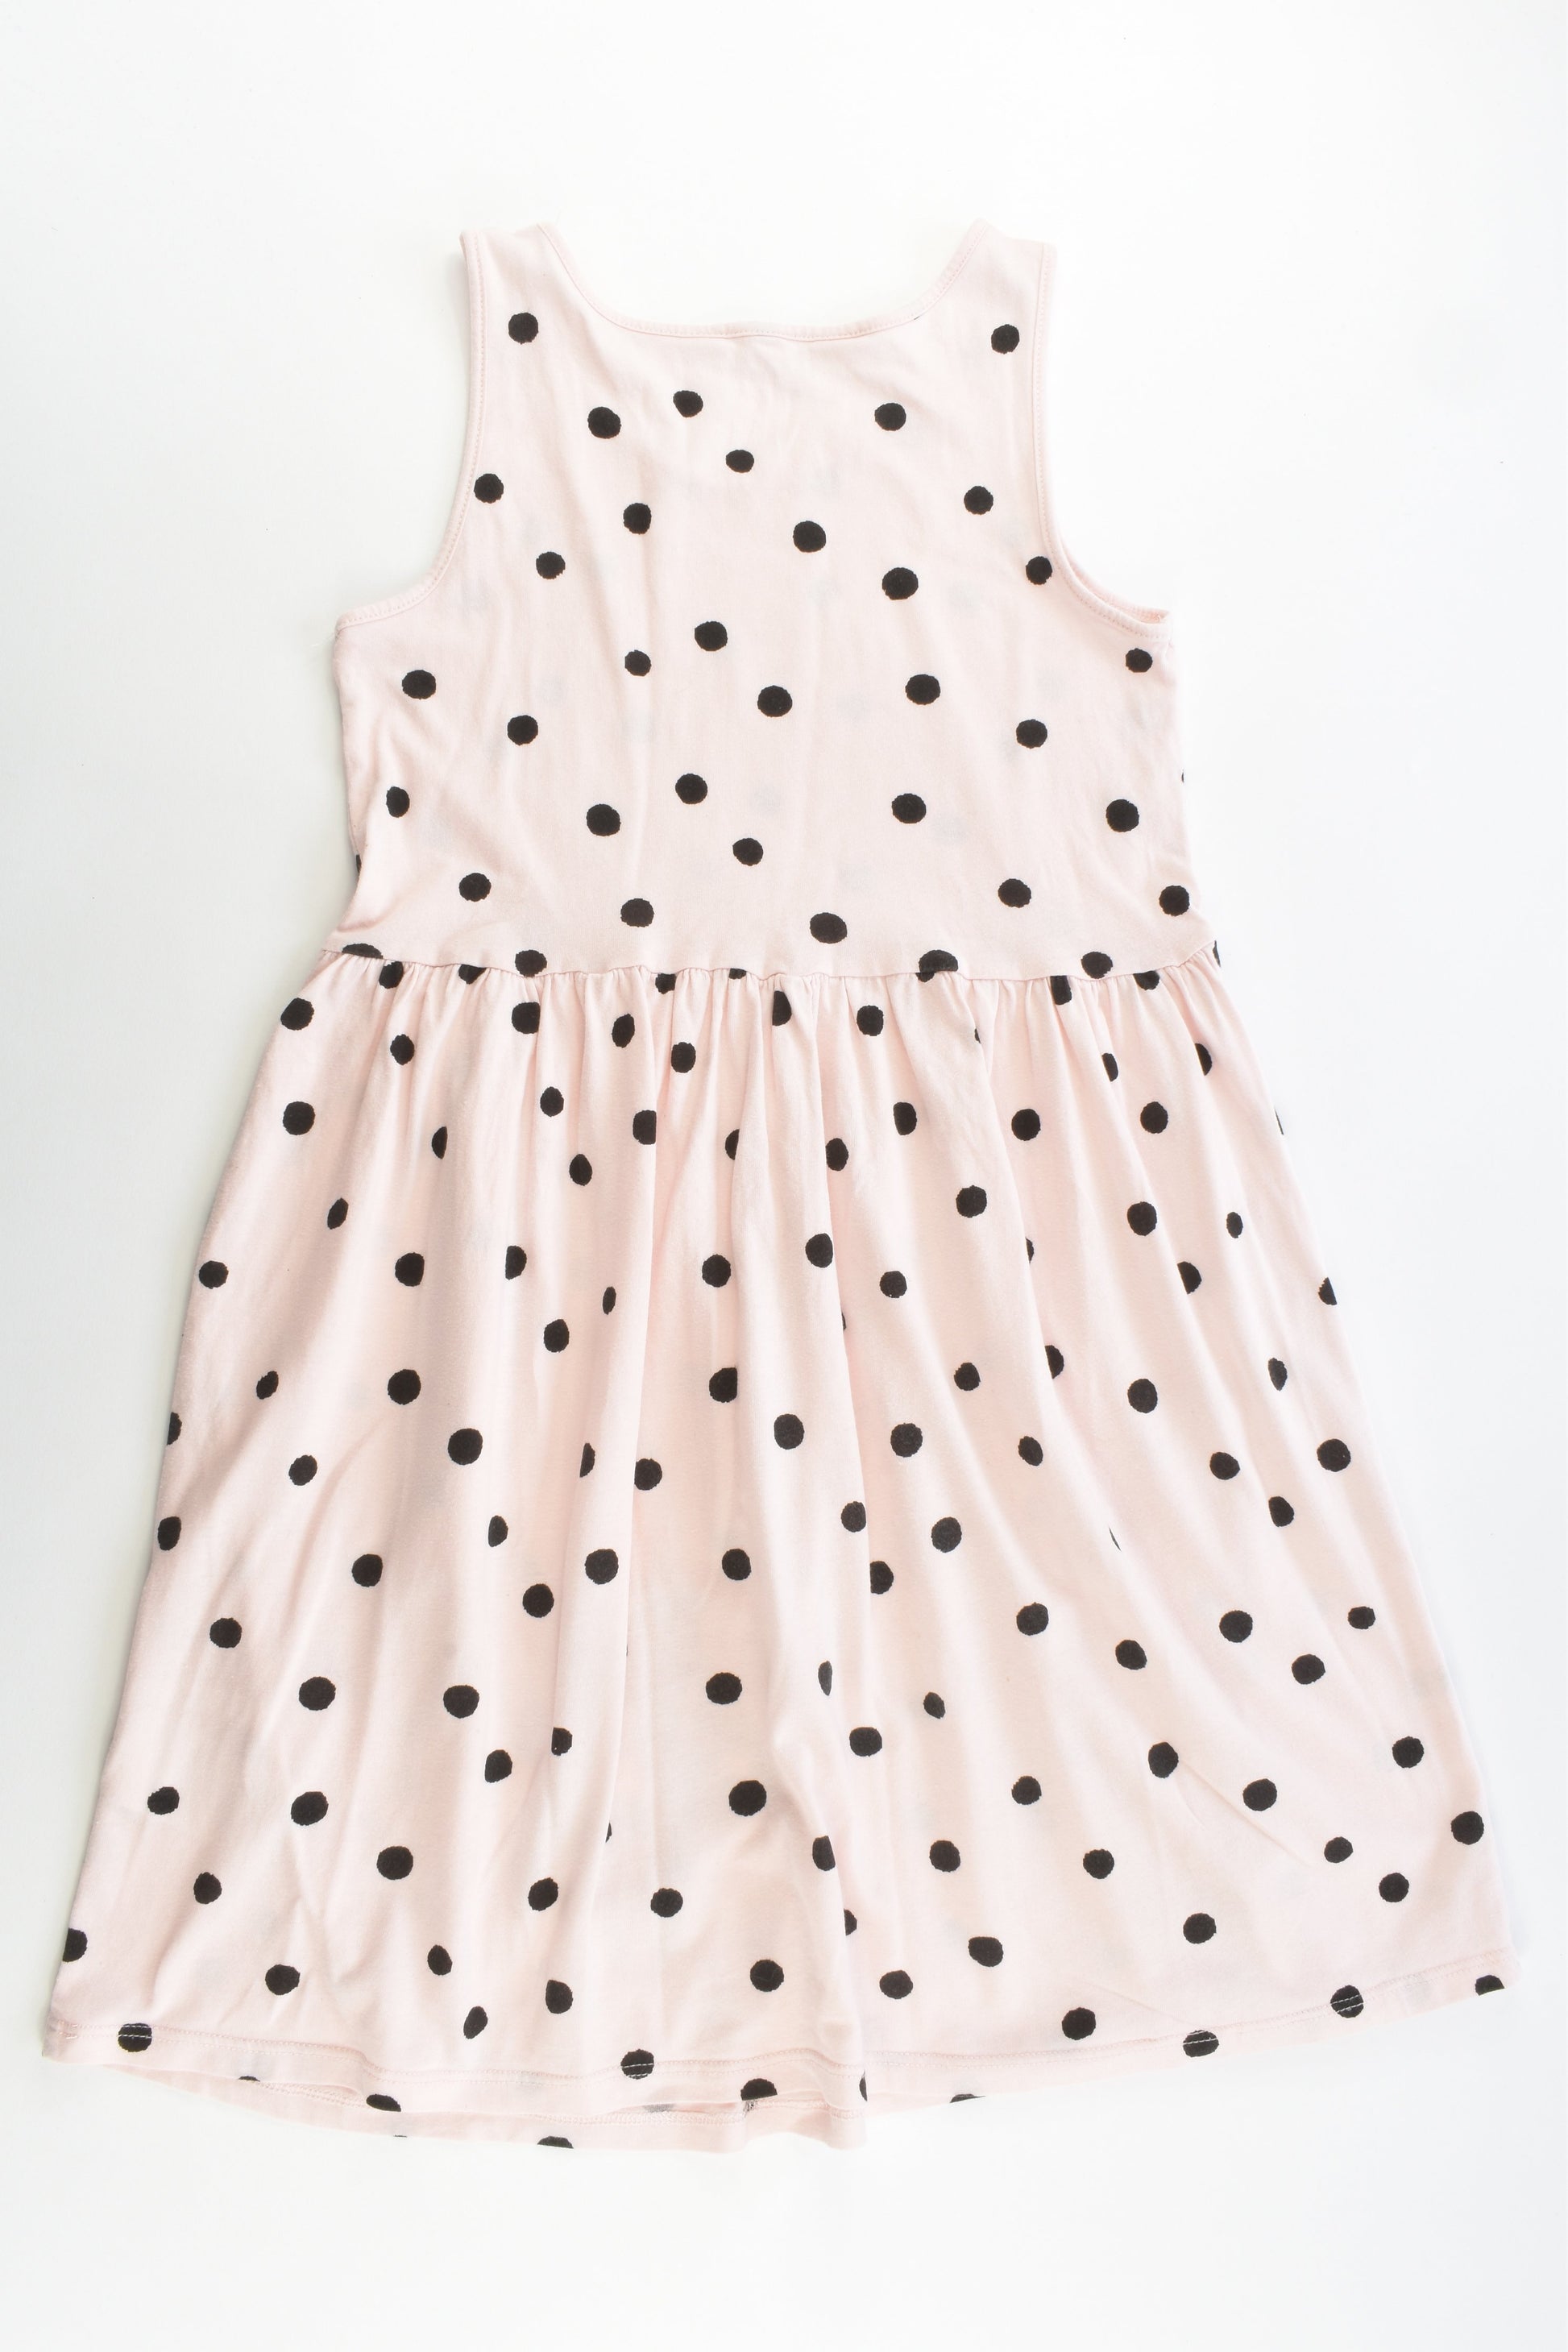 H&M Size 8-10 Bunny and Cat Dress